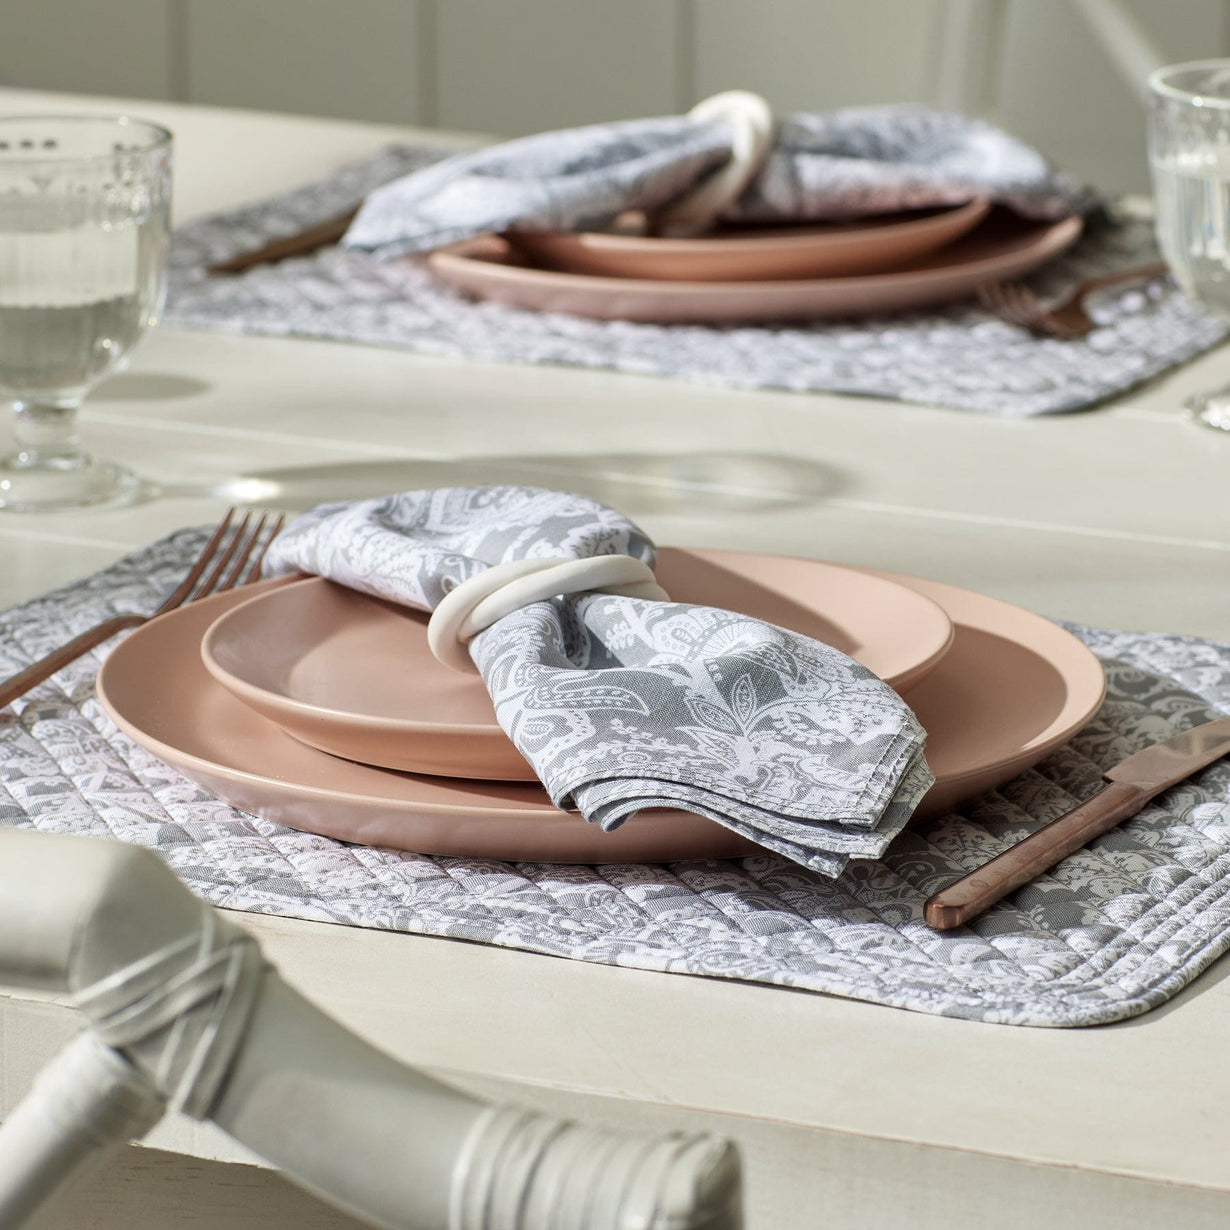 table place setting with cotton napkins in gray paisley pattern